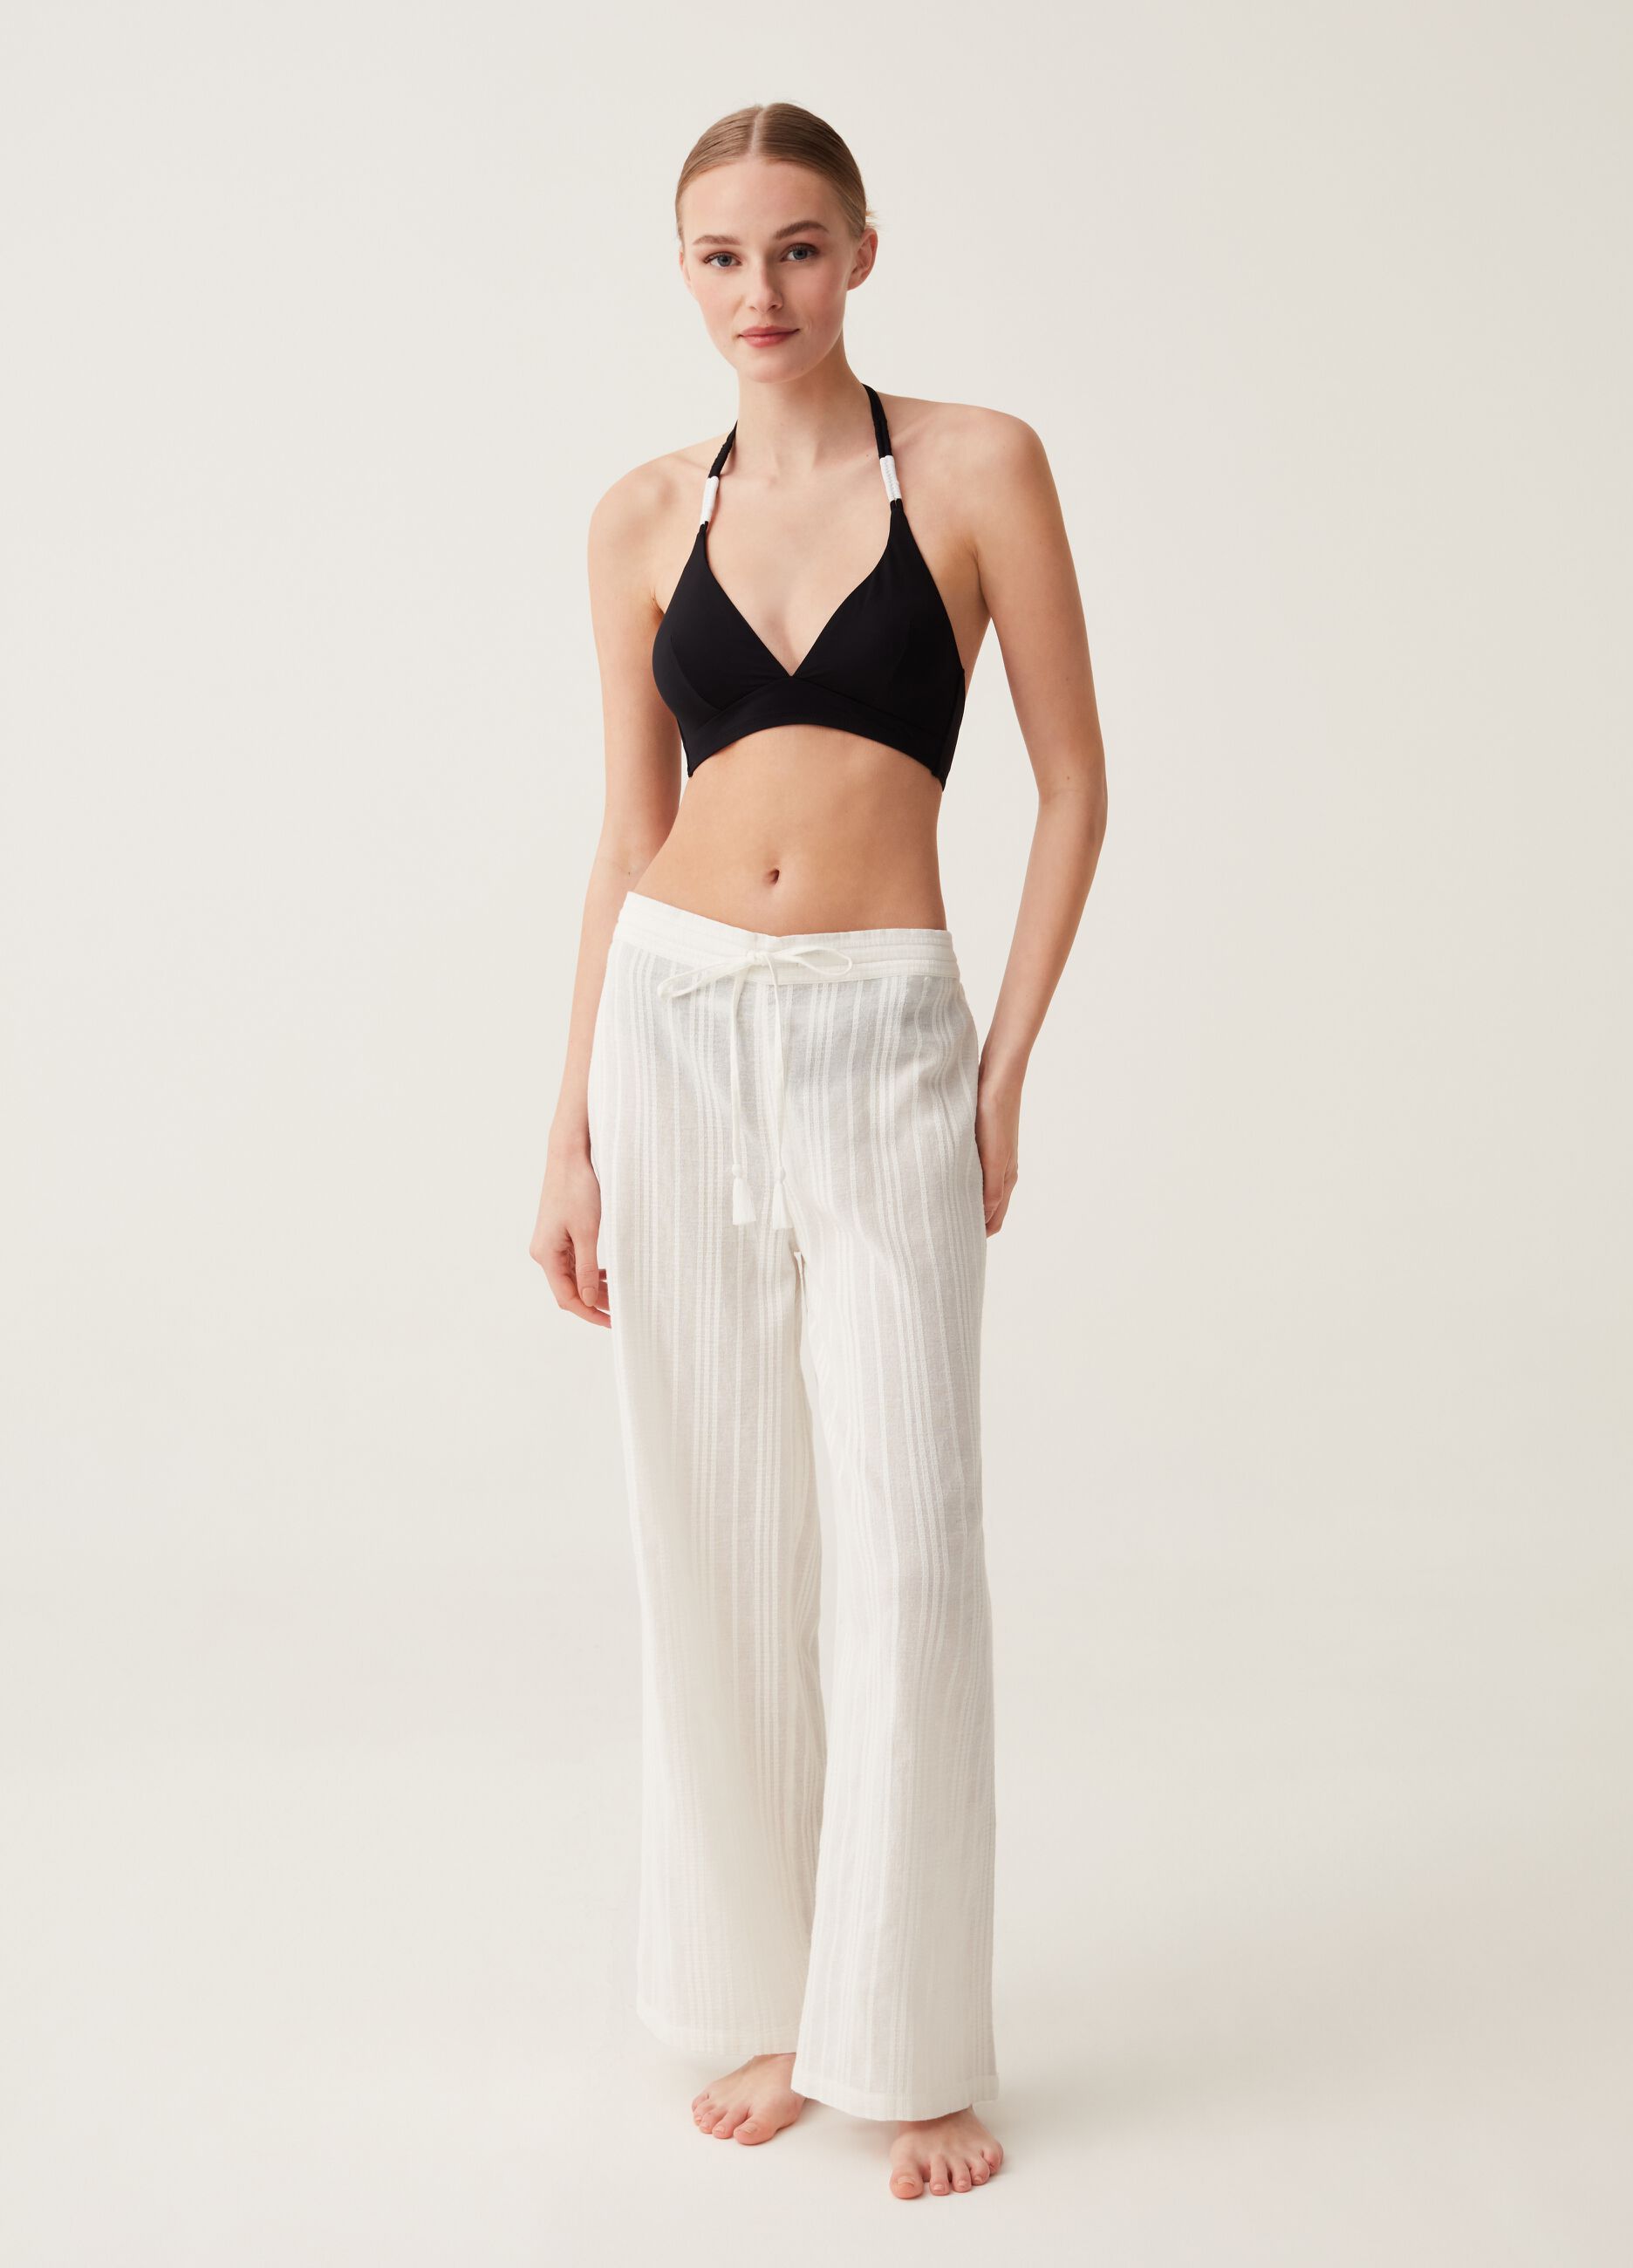 Striped cotton beach cover-up trousers